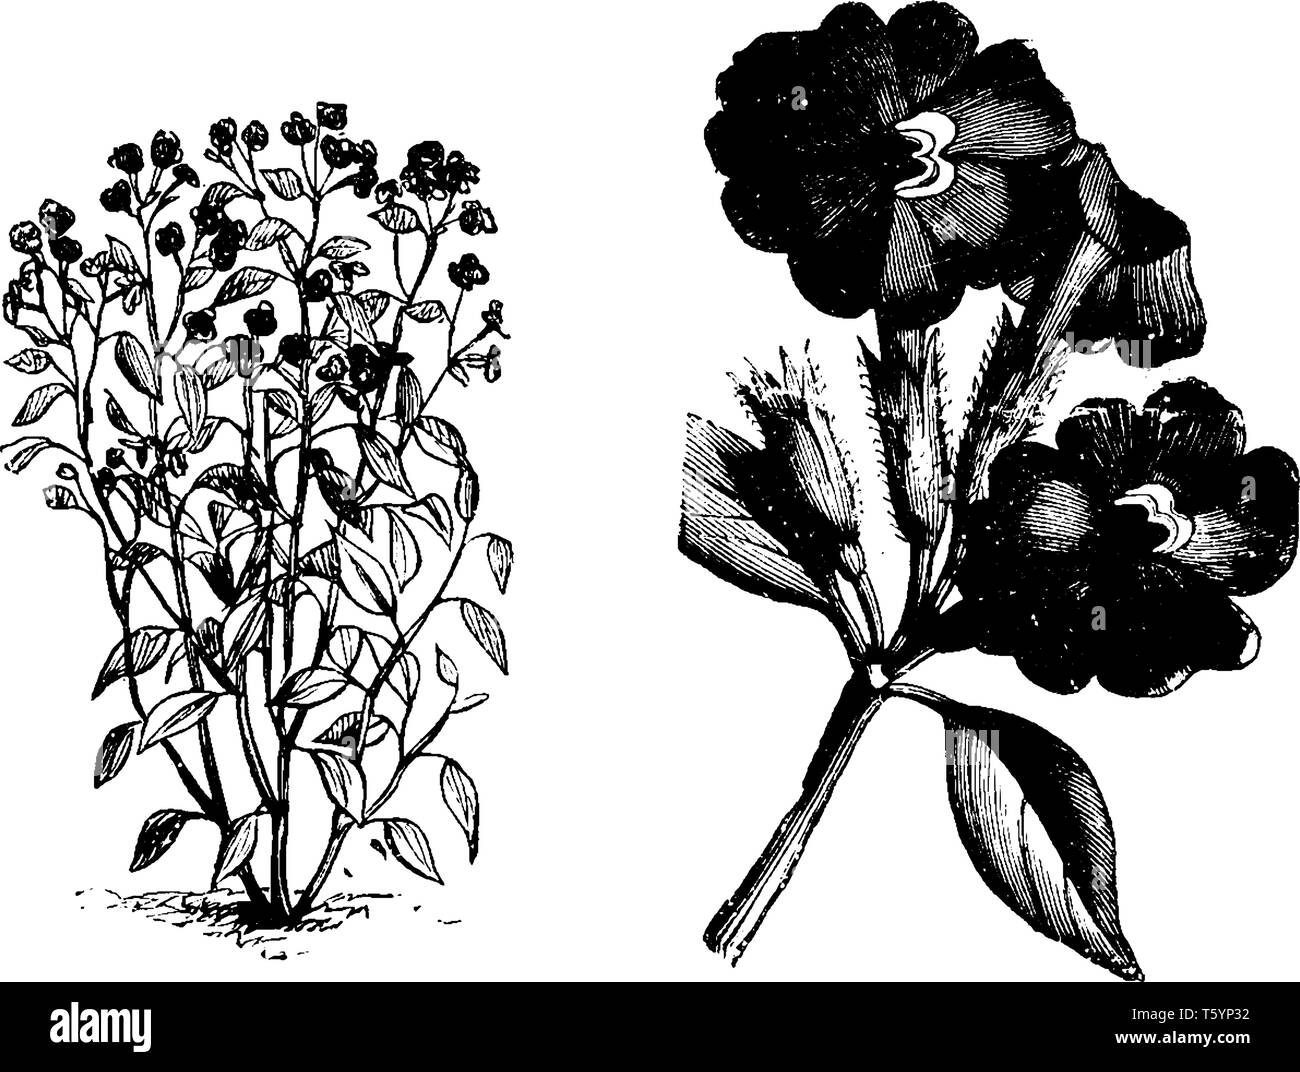 The Browallia Elata flowers are funnel shaped flowers and oval shaped leaves. The flower sepal is long and tabular, vintage line drawing or engraving  Stock Vector